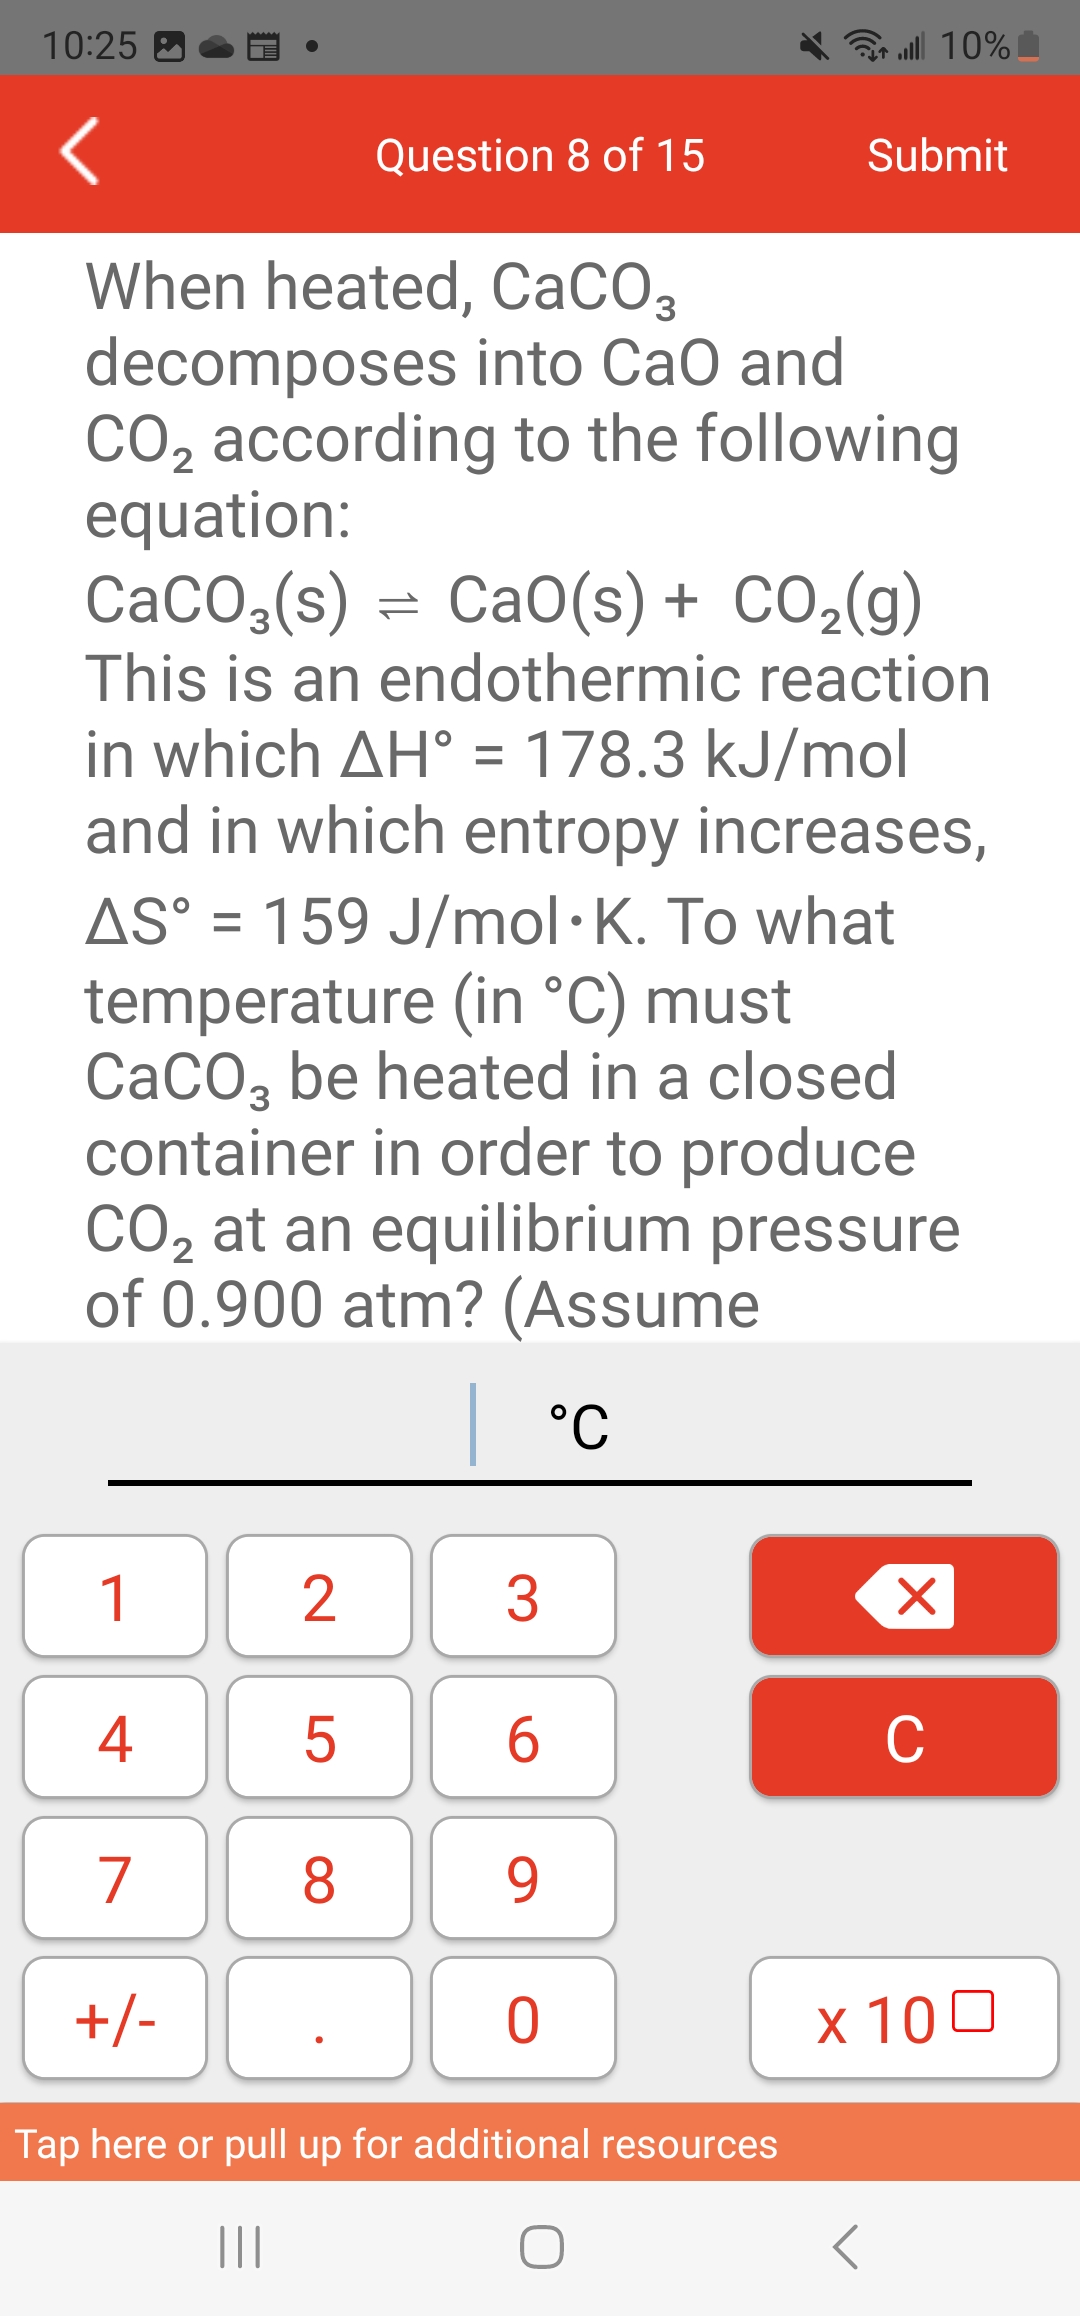 10:25
1
When heated, CaCO3
decomposes into CaO and
CO₂ according to the following
2
4
7
+/-
equation:
CaCO,(s) = CaO(s)+ CO,(g)
This is an endothermic reaction
in which AH° = 178.3 kJ/mol
and in which entropy increases,
AS° = 159 J/mol. K. To what
temperature (in °C) must
CaCO3 be heated in a closed
container in order to produce
CO₂ at an equilibrium pressure
2
of 0.900 atm? (Assume
| °C
2
Question 8 of 15
5
8
3
6
9
all 10%
0
Submit
Tap here or pull up for additional resources
|||
O
Xx
C
x 100